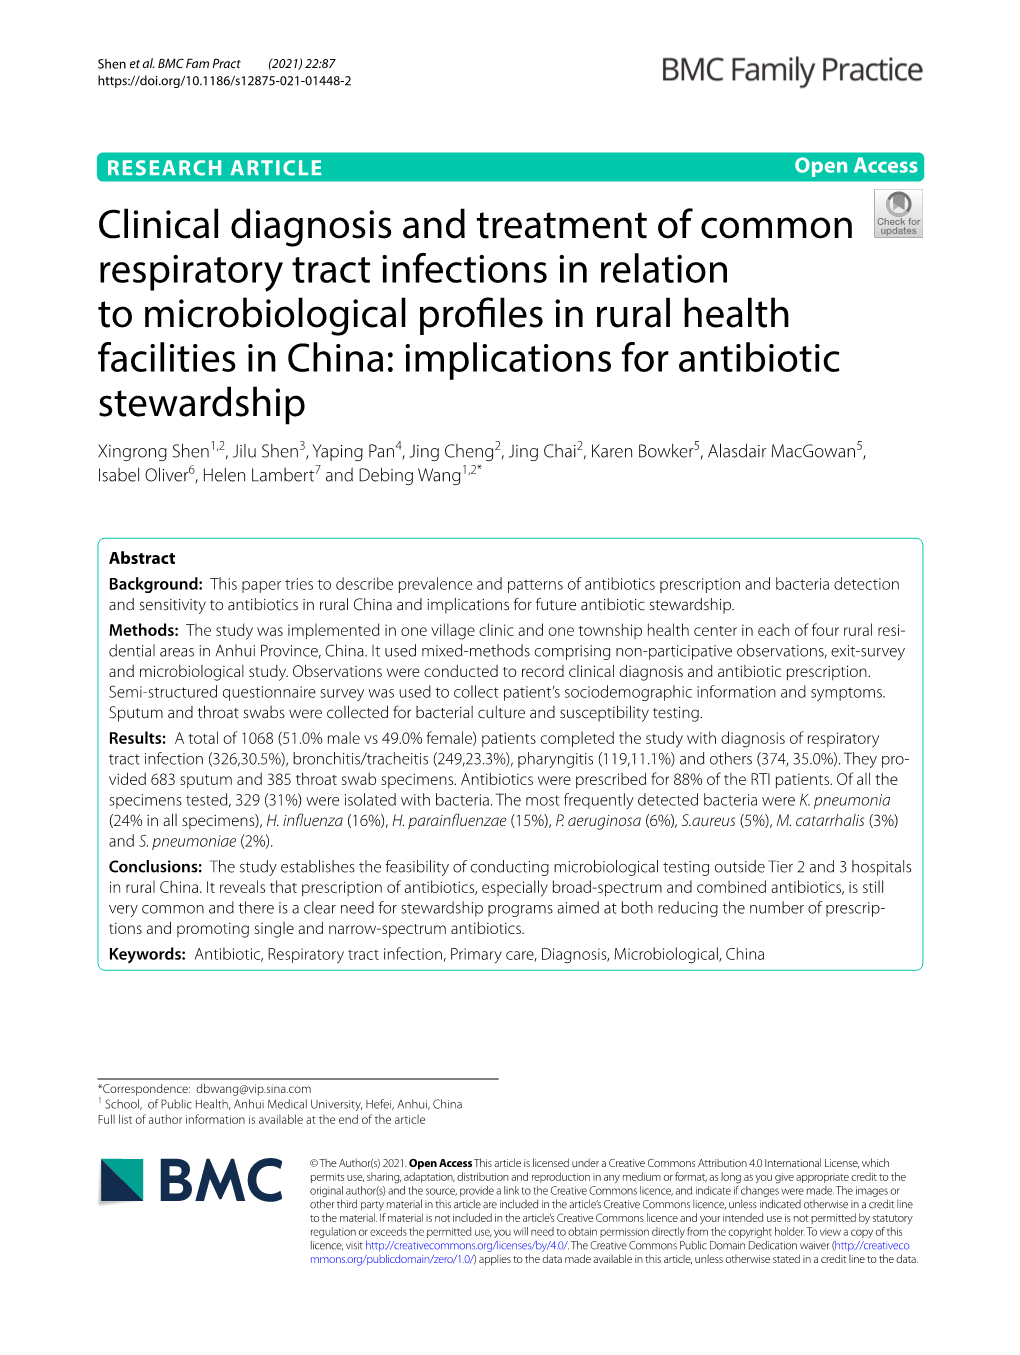 Clinical Diagnosis and Treatment of Common Respiratory Tract Infections